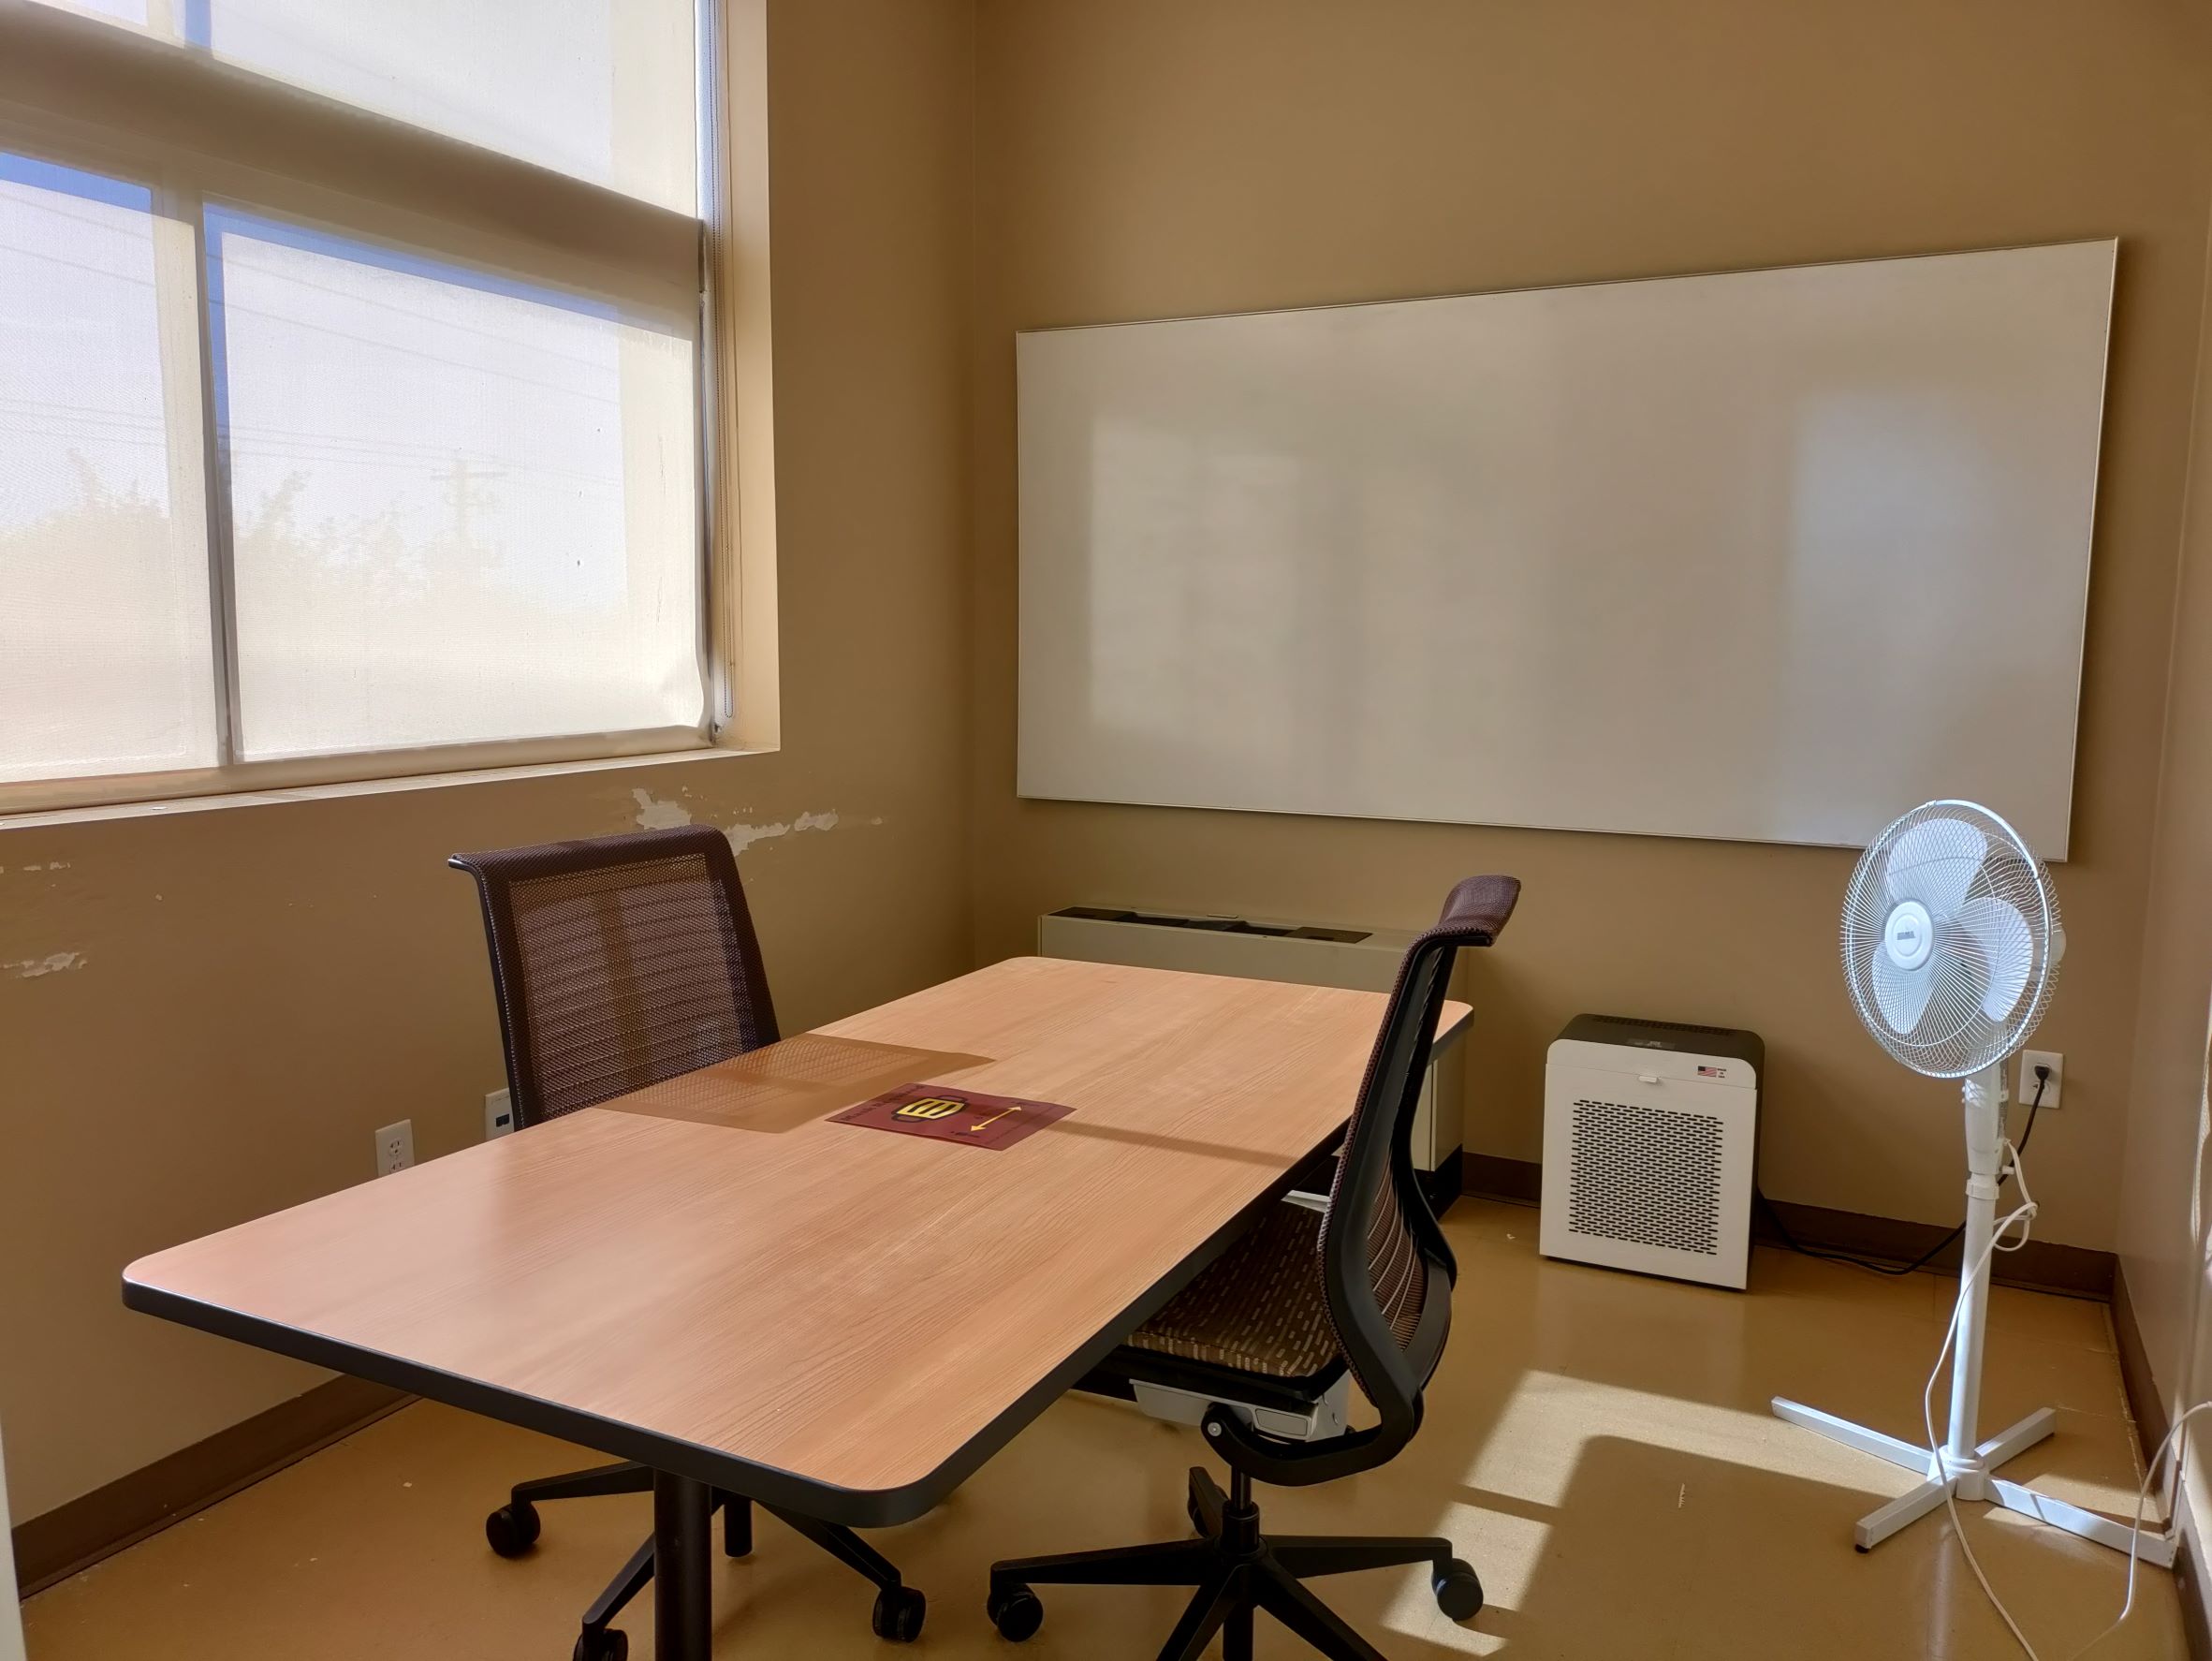 Study Room 204 shows a table with two chairs, a whiteboard, a fan, and an air filter. Blinds cover a window.